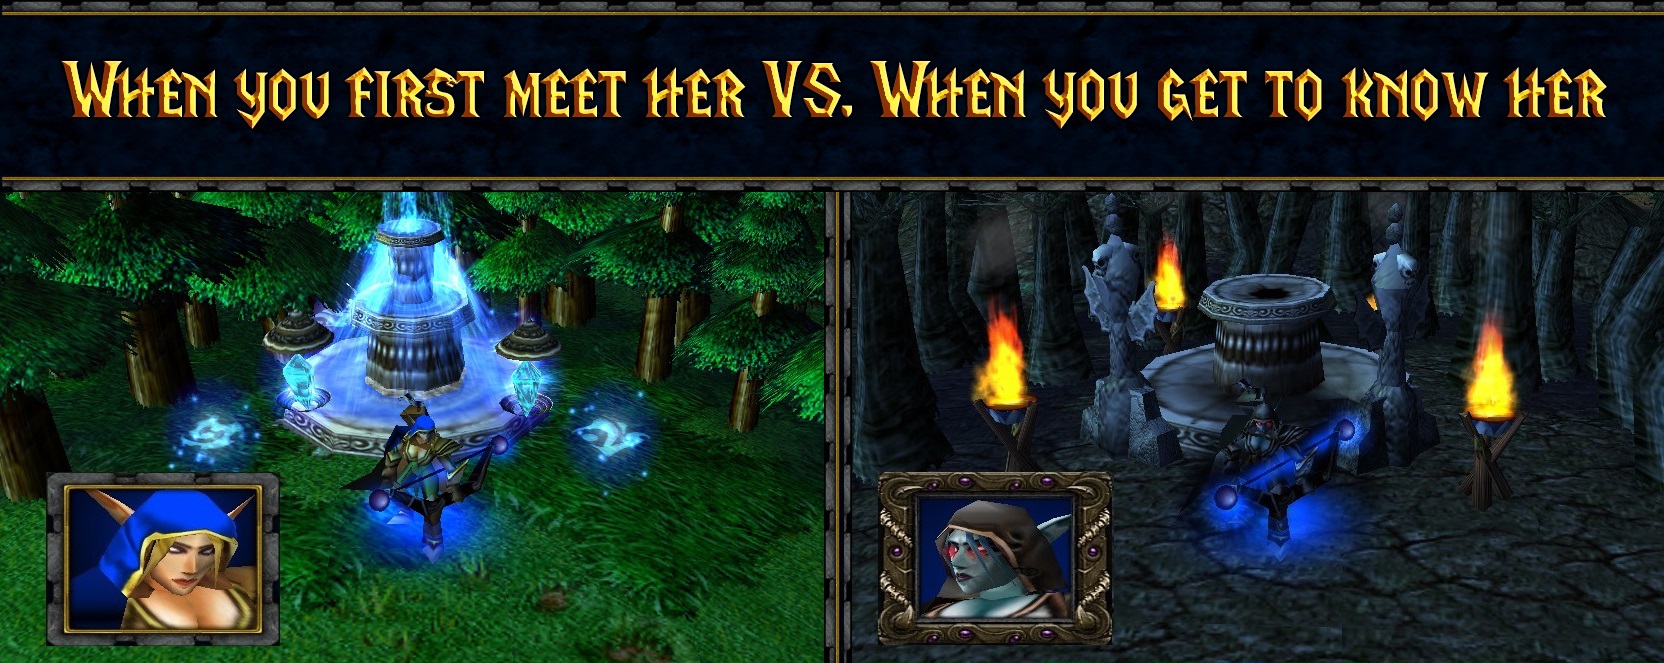 When You First Meet Her Vs When You Get To Know Her MEME